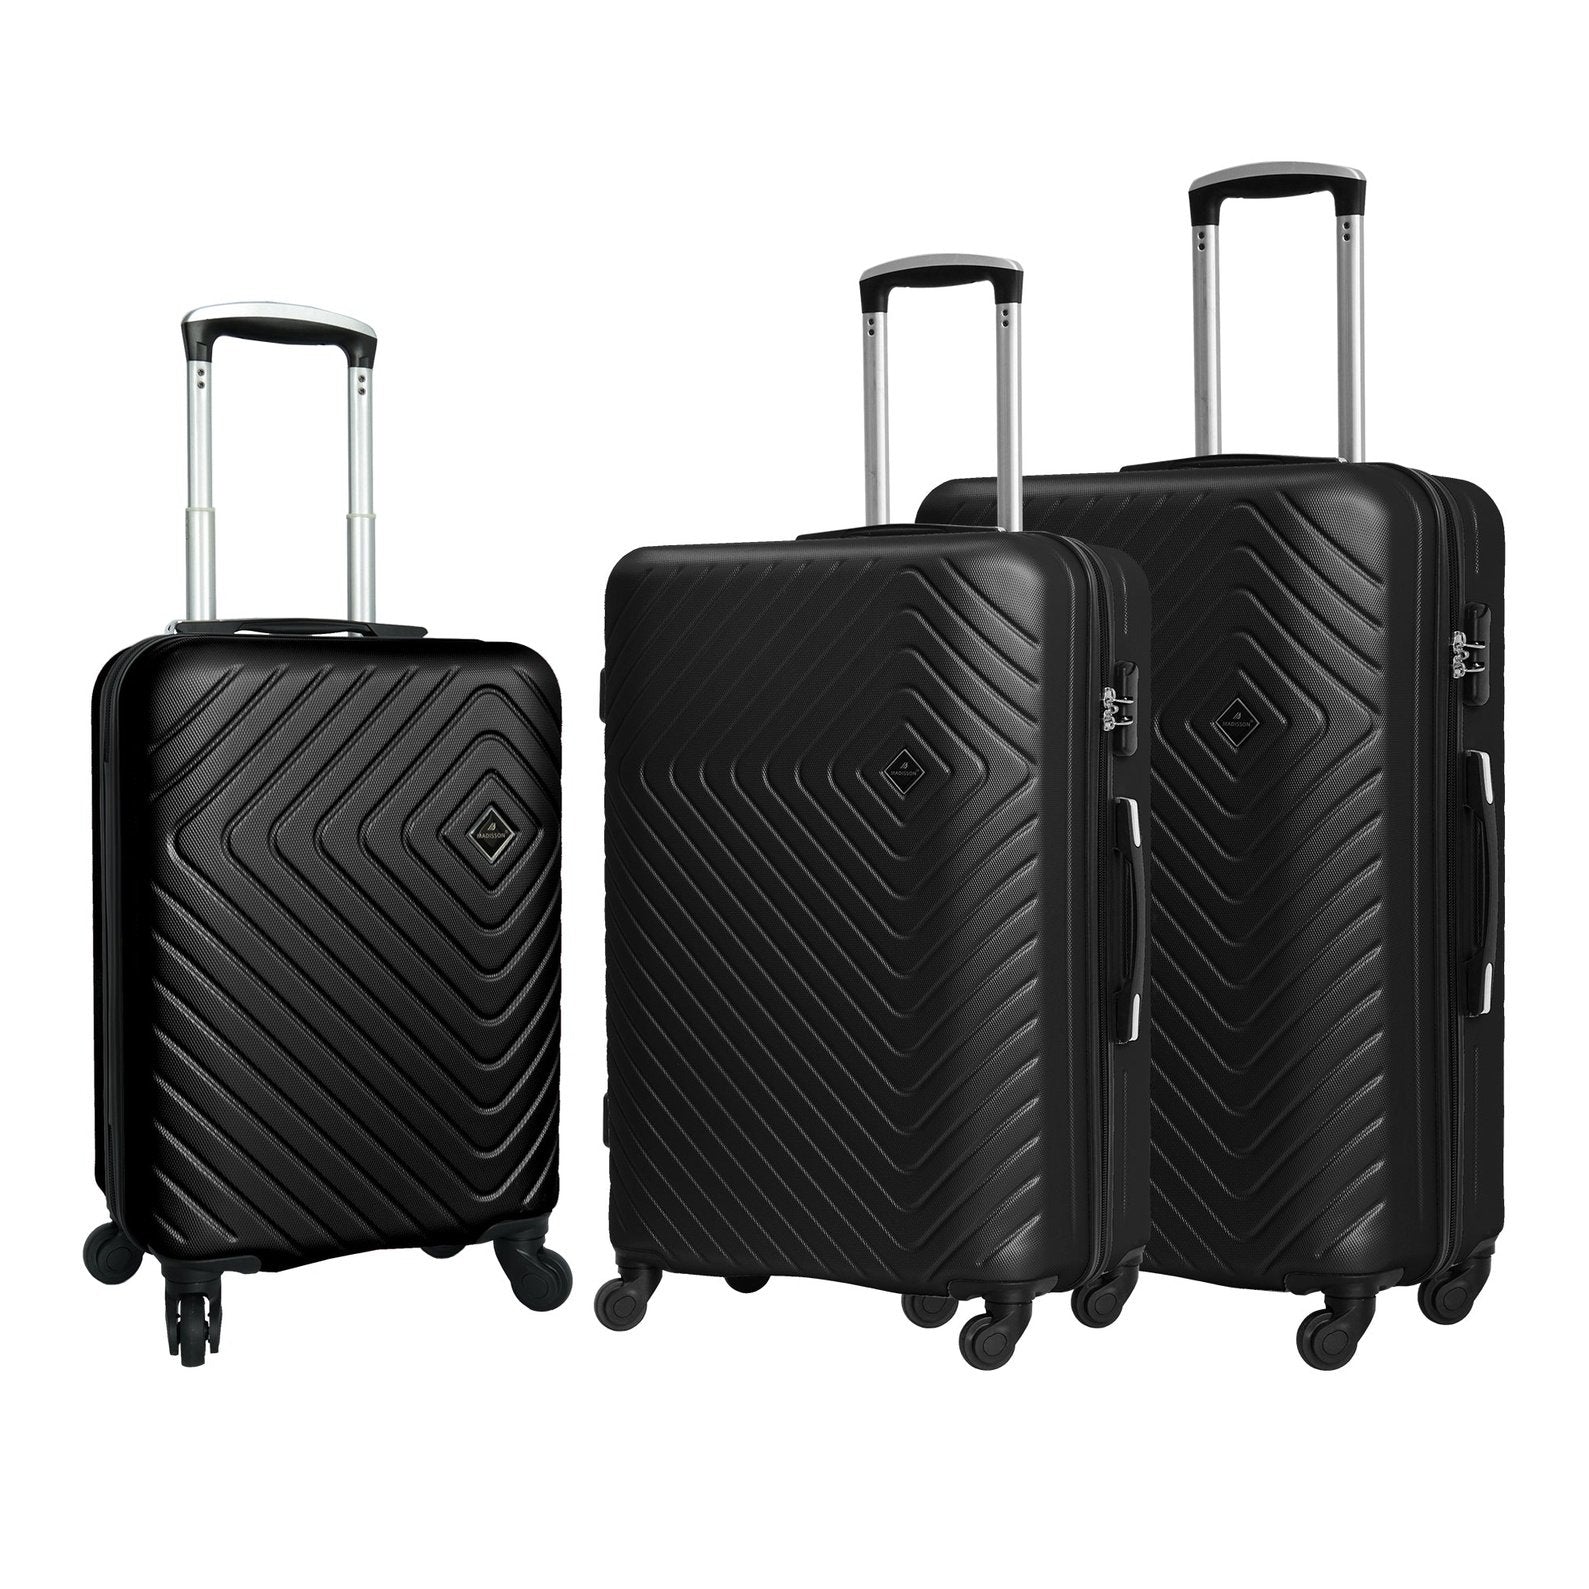 Easy Luggage Madisson Super Lightweight Hard Shell Luggage featuring 4 smooth-rolling spinner wheels Black